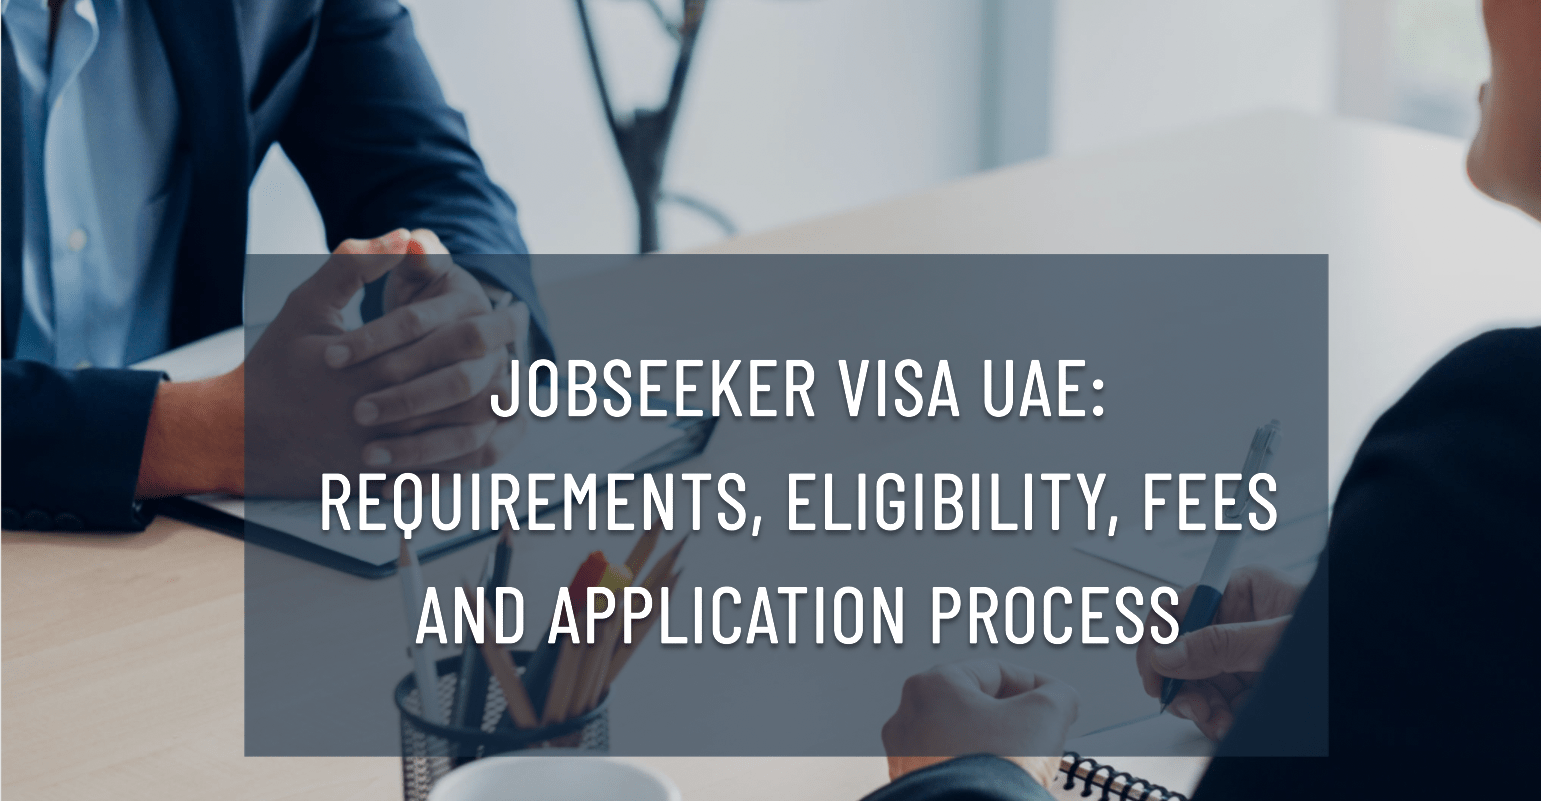 Job Seeker Visa UAE: Requirements, Eligibility, Fees and Application Process